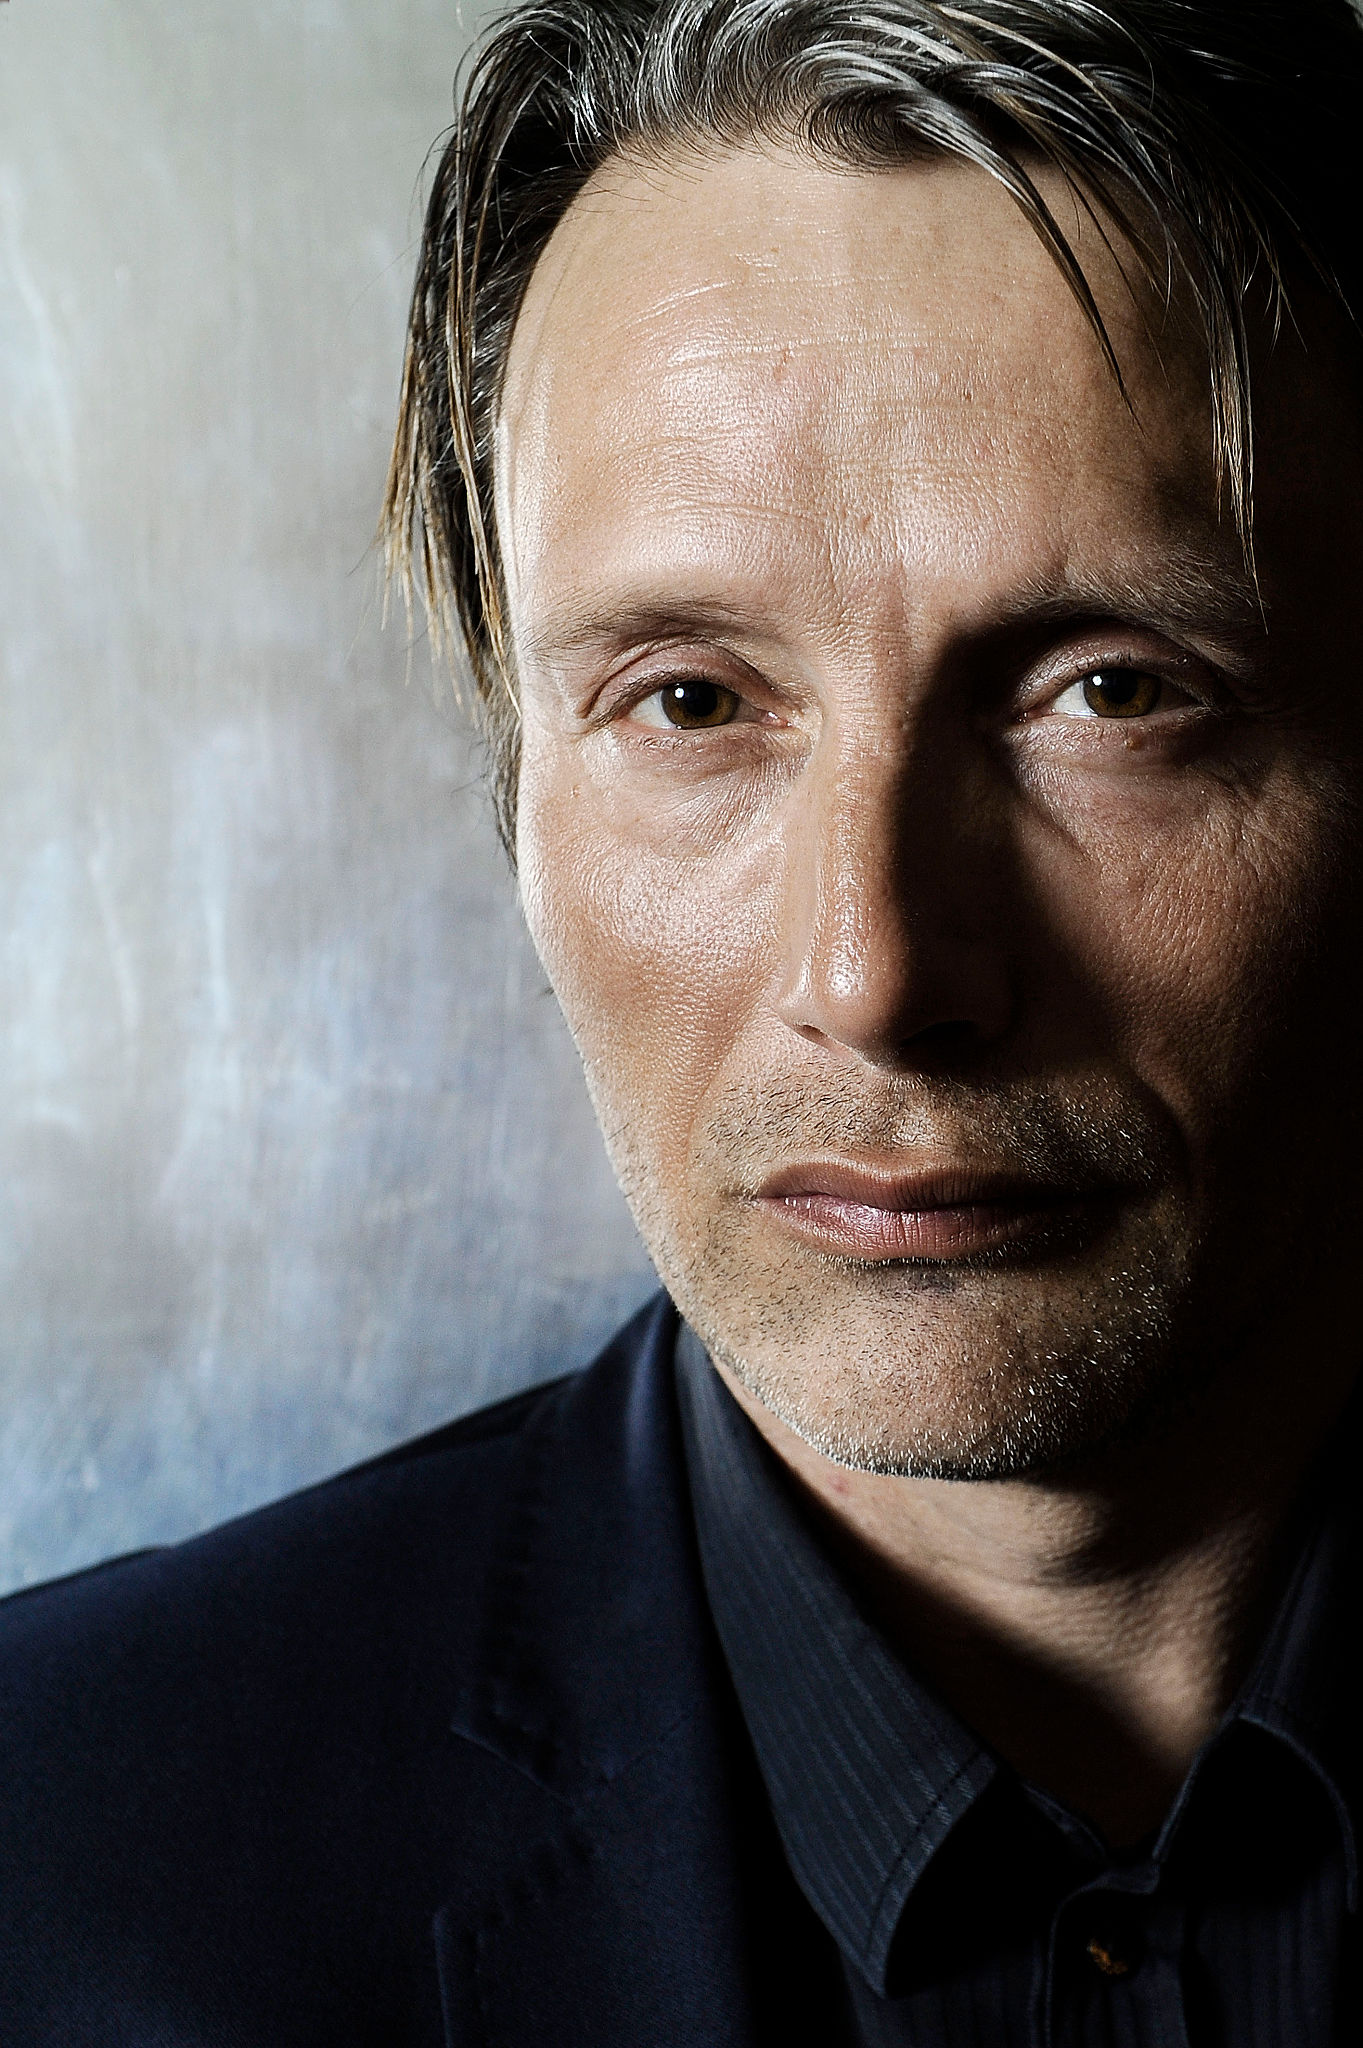 Mads Mikkelsen photo 67 of 58 pics, wallpaper - photo #927175 - ThePlace2